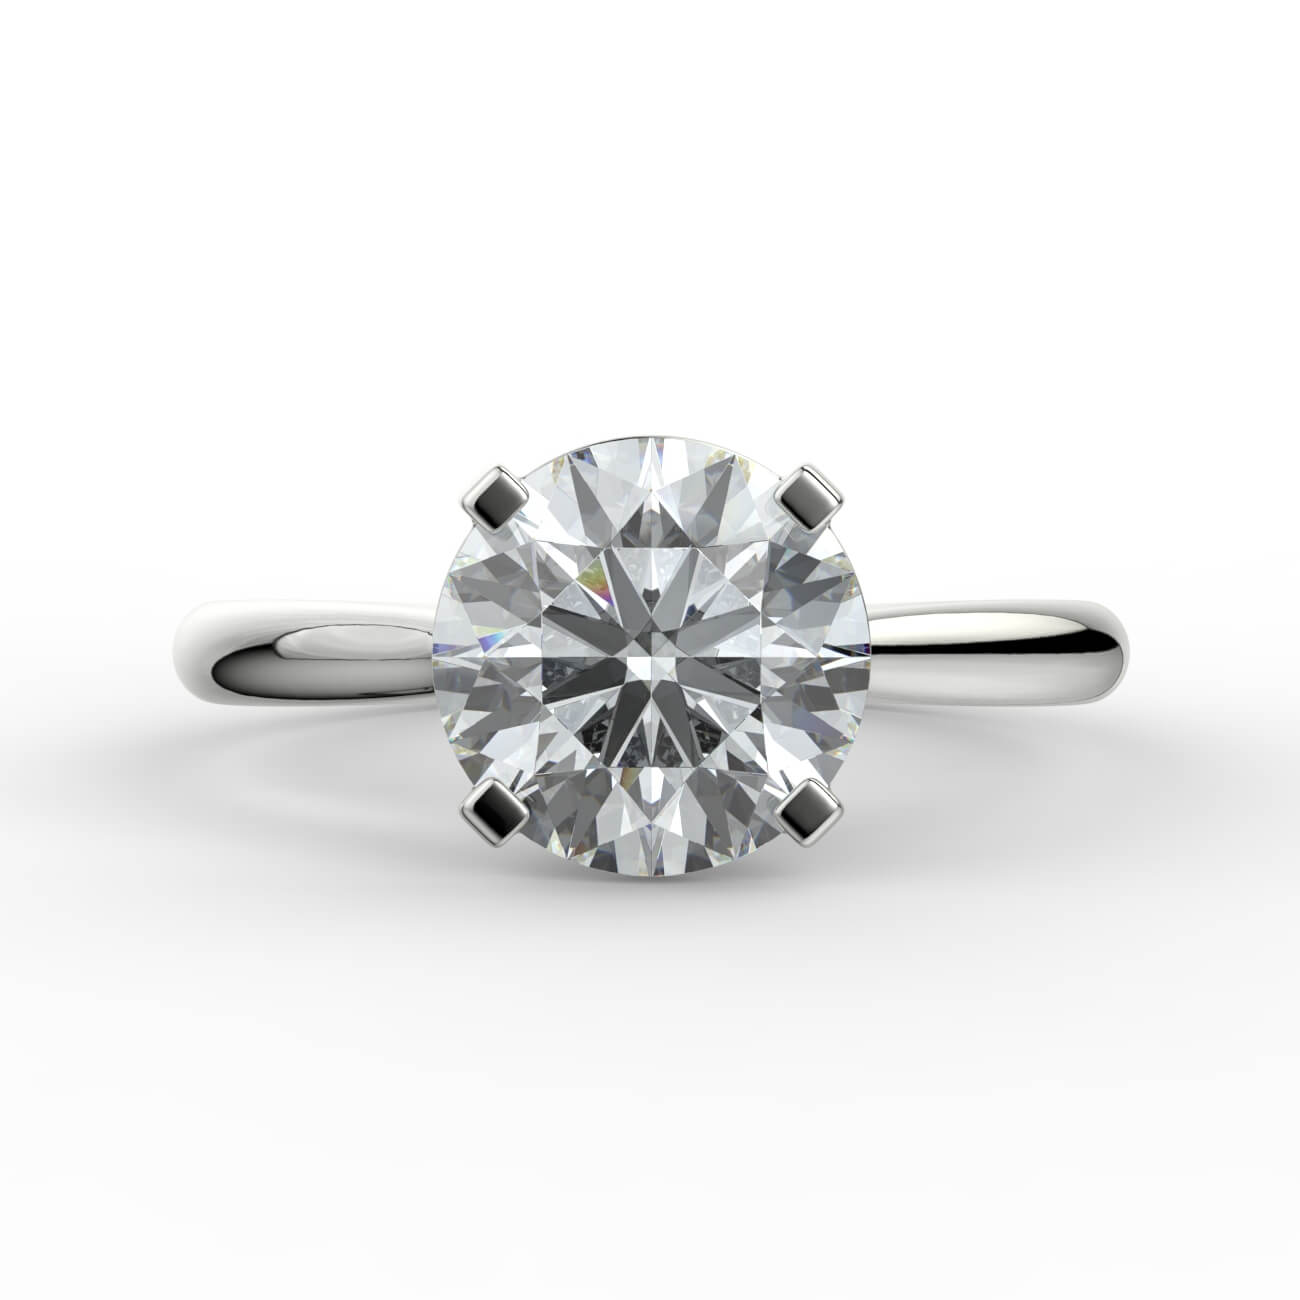 Round brilliant cut diamond cathedral engagement ring in white gold – Australian Diamond Network